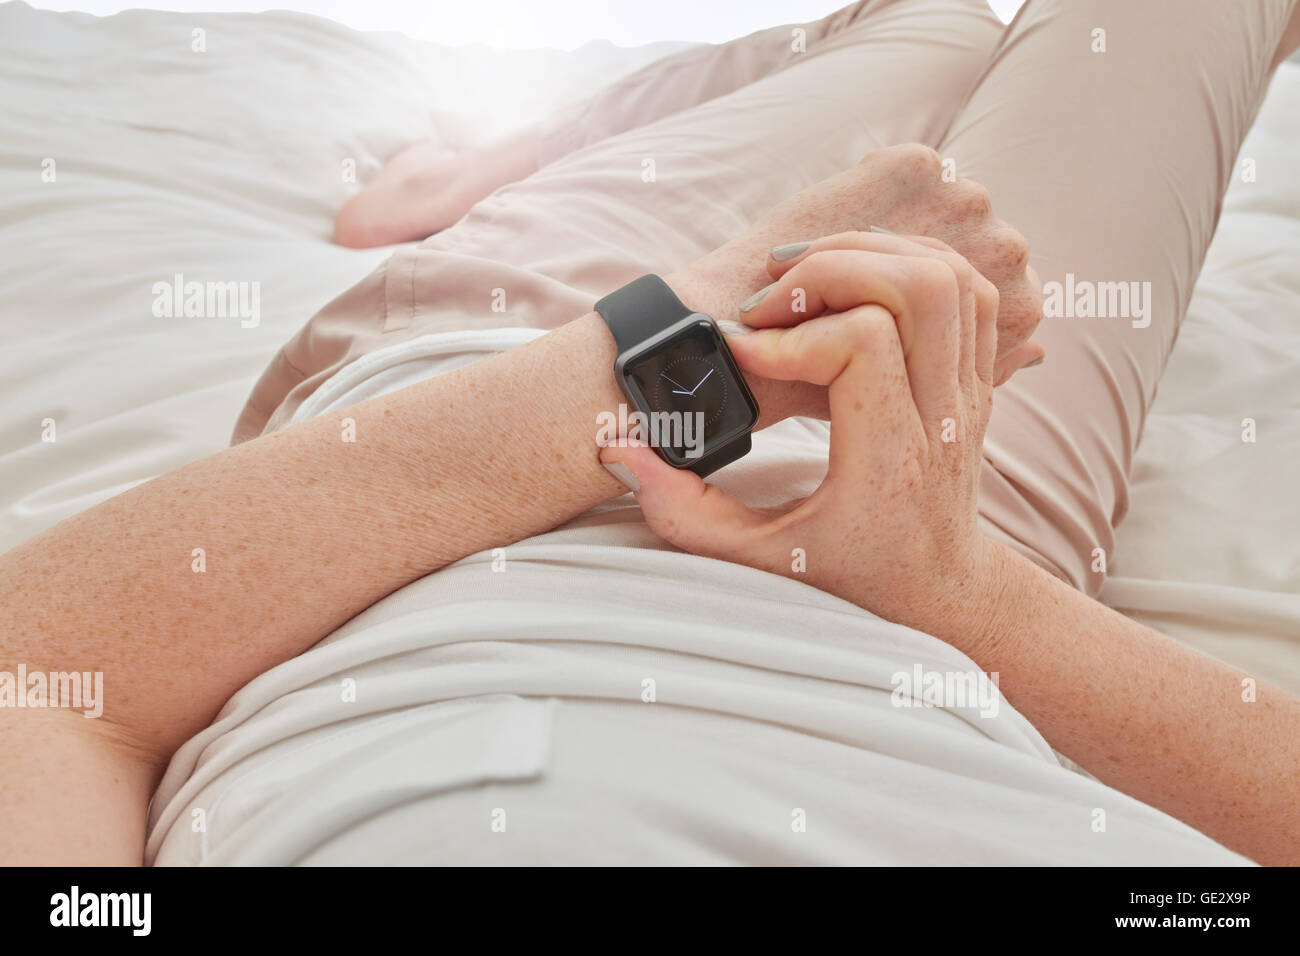 Close up image of woman using smartwatch to check time. Female lying on bed using smart wrist watch. Stock Photo